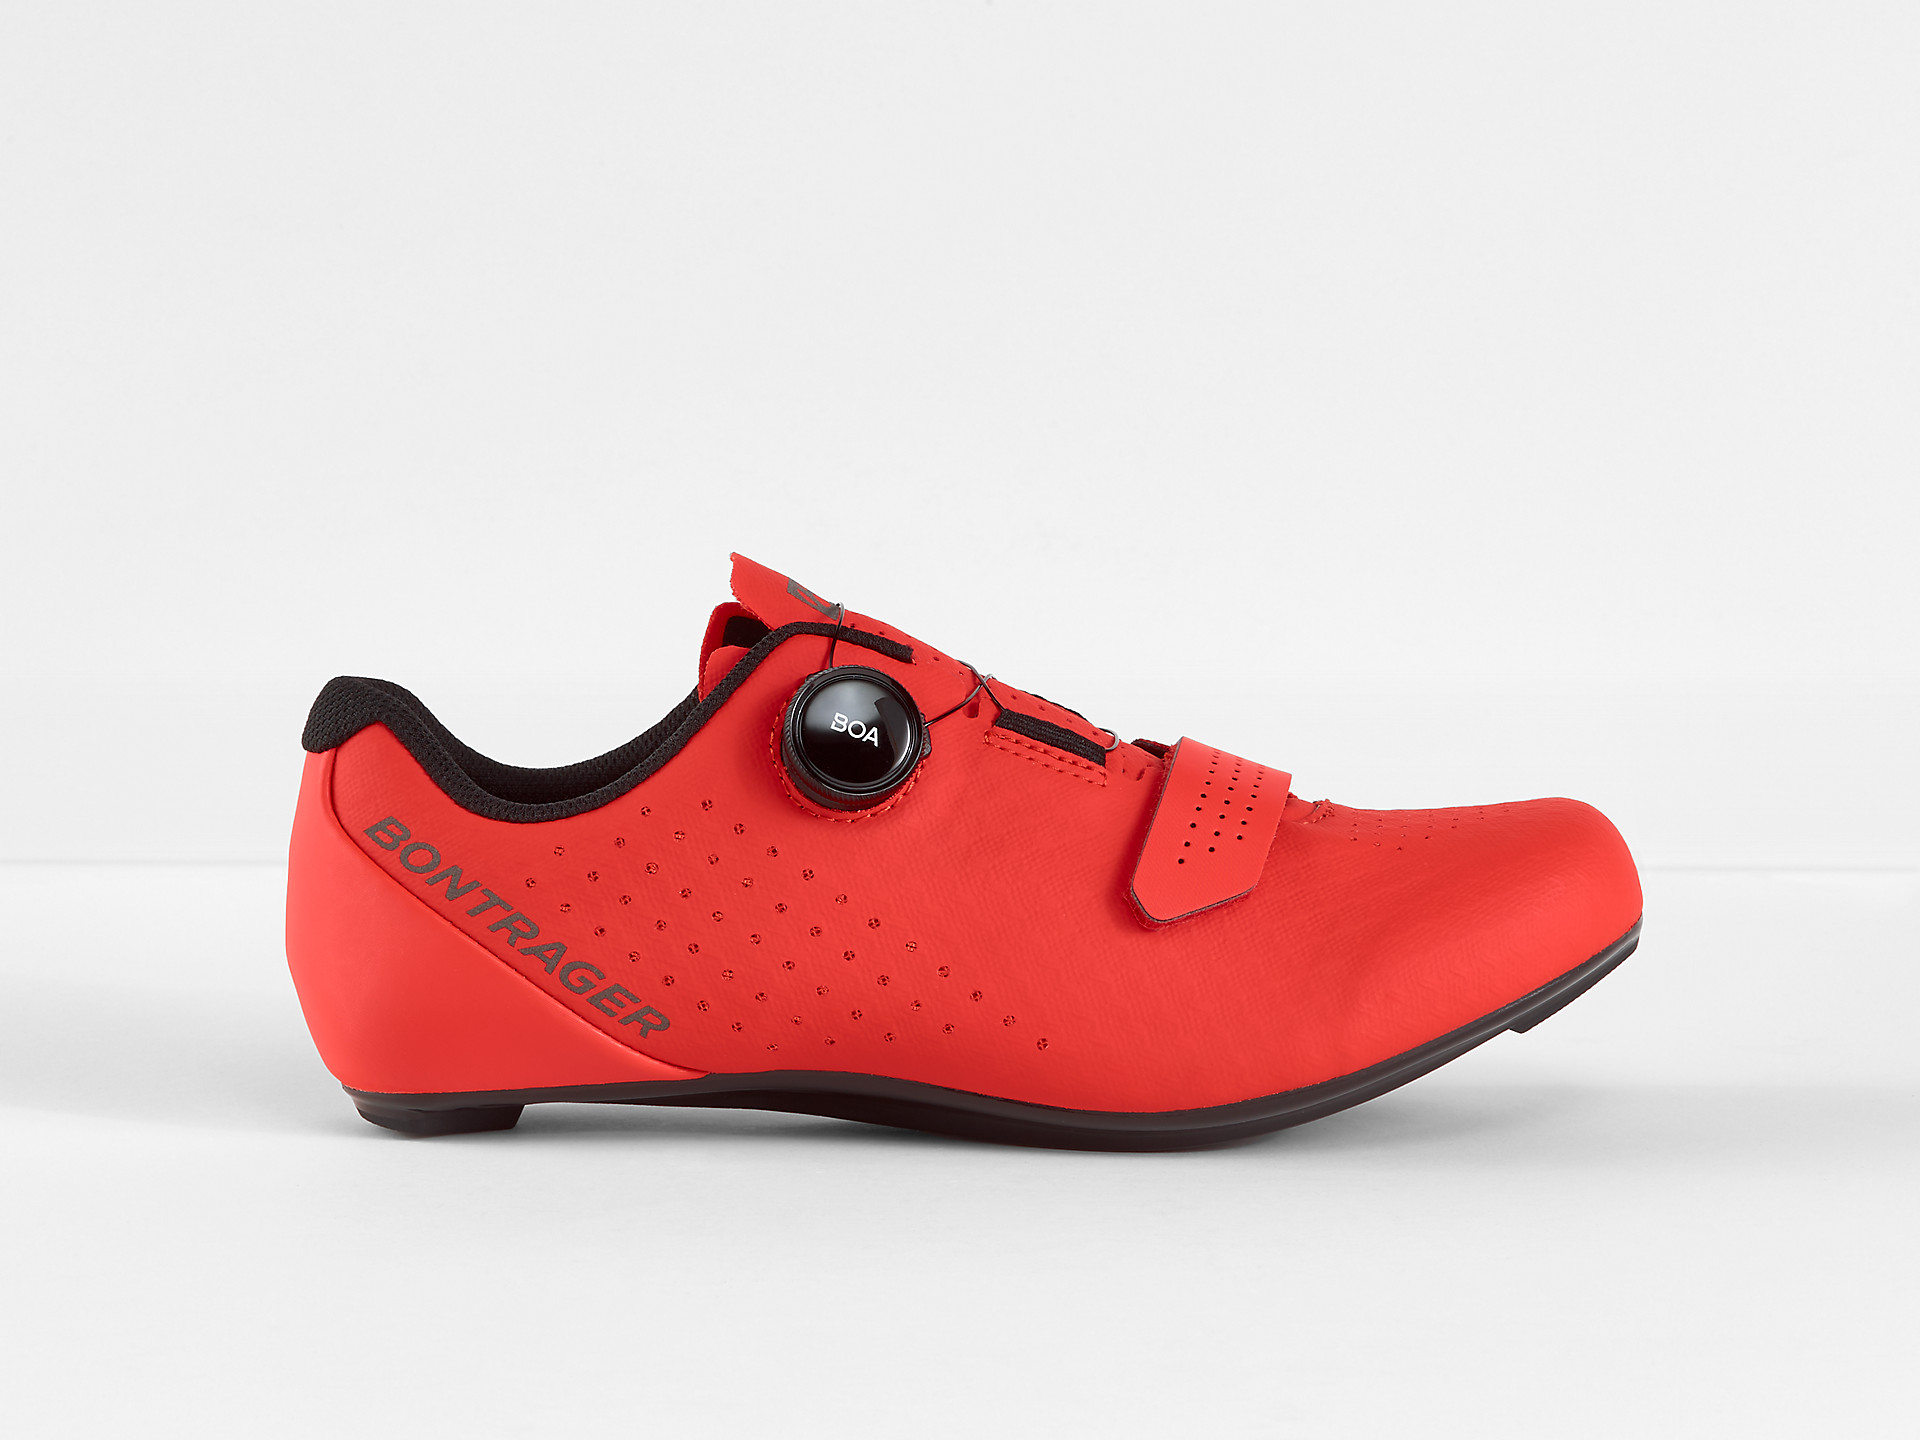 <a href="https://cycles-clement.be/product/chaussure-bont-circuit-race-43-red/">CHAUSSURE BONT CIRCUIT RACE 43 RED</a>